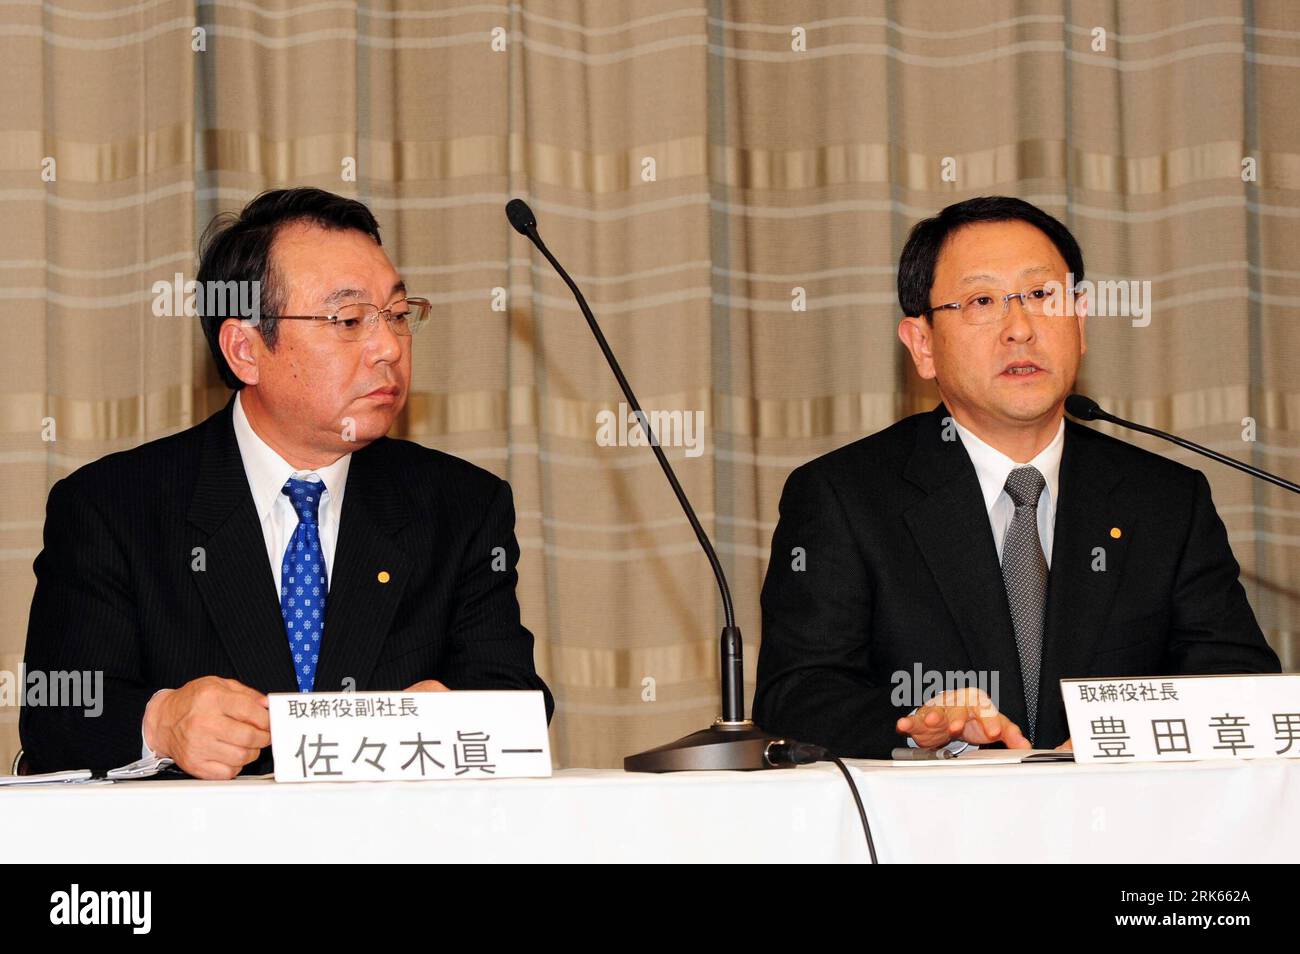 Bildnummer: 53802459  Datum: 17.02.2010  Copyright: imago/Xinhua (100217) -- TOKYO, Feb. 17, 2010 (Xinhua) -- Toyota Motor Corp. President Akio Toyoda (R) and Vice President Shinichi Sasaki attend a news conference, in Tokyo, Japan, on Feb. 17, 2010. Akio Toyoda said on Wednesday that he is unlikely to attend a U.S. congressional hearing later this month over the safety of Toyota products, and that North America chief  would attend in his place. (Xinhua/Ji Chunpeng) (axy) (3)JAPAN-TOKYO-TOYOTA-PRESS CONFERENCE PUBLICATIONxNOTxINxCHN People Wirtschaft kbdig xdp 2010 quer o0 Autoindustrie    Bil Stock Photo